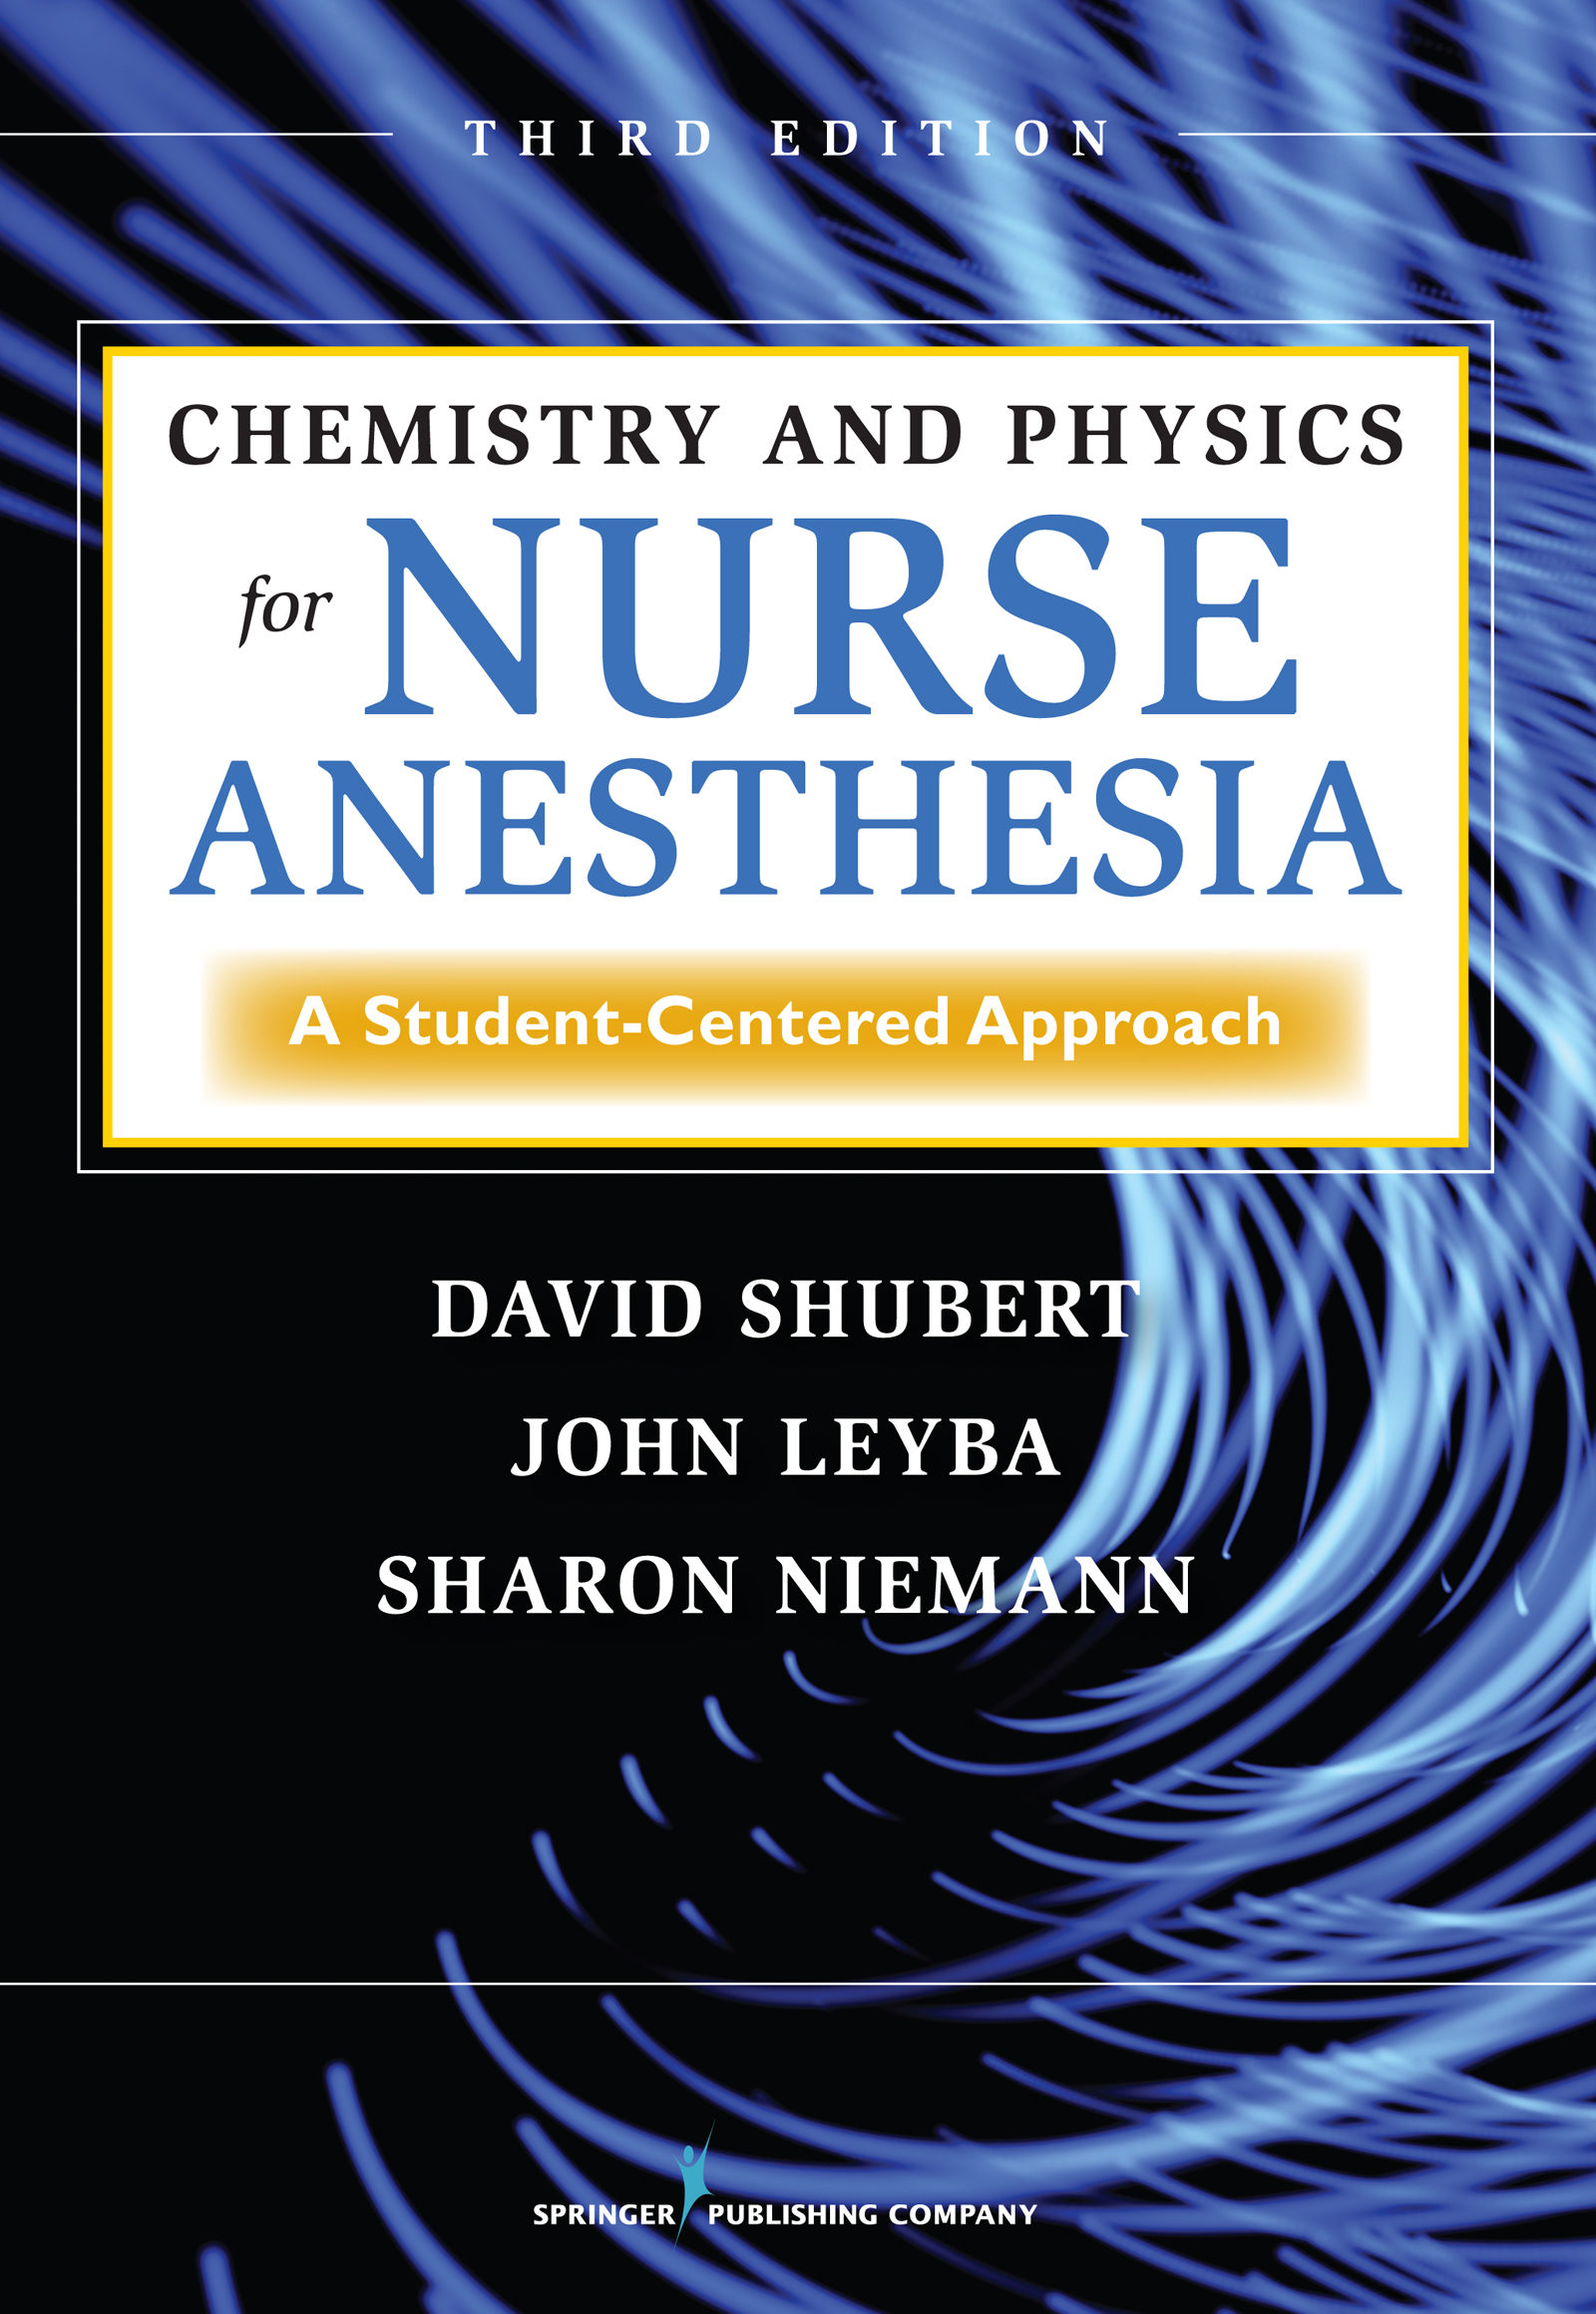 CHEMISTRY AND PHYSICS FOR NURSE ANESTHESIA 3RD EDITION PDF Free Download